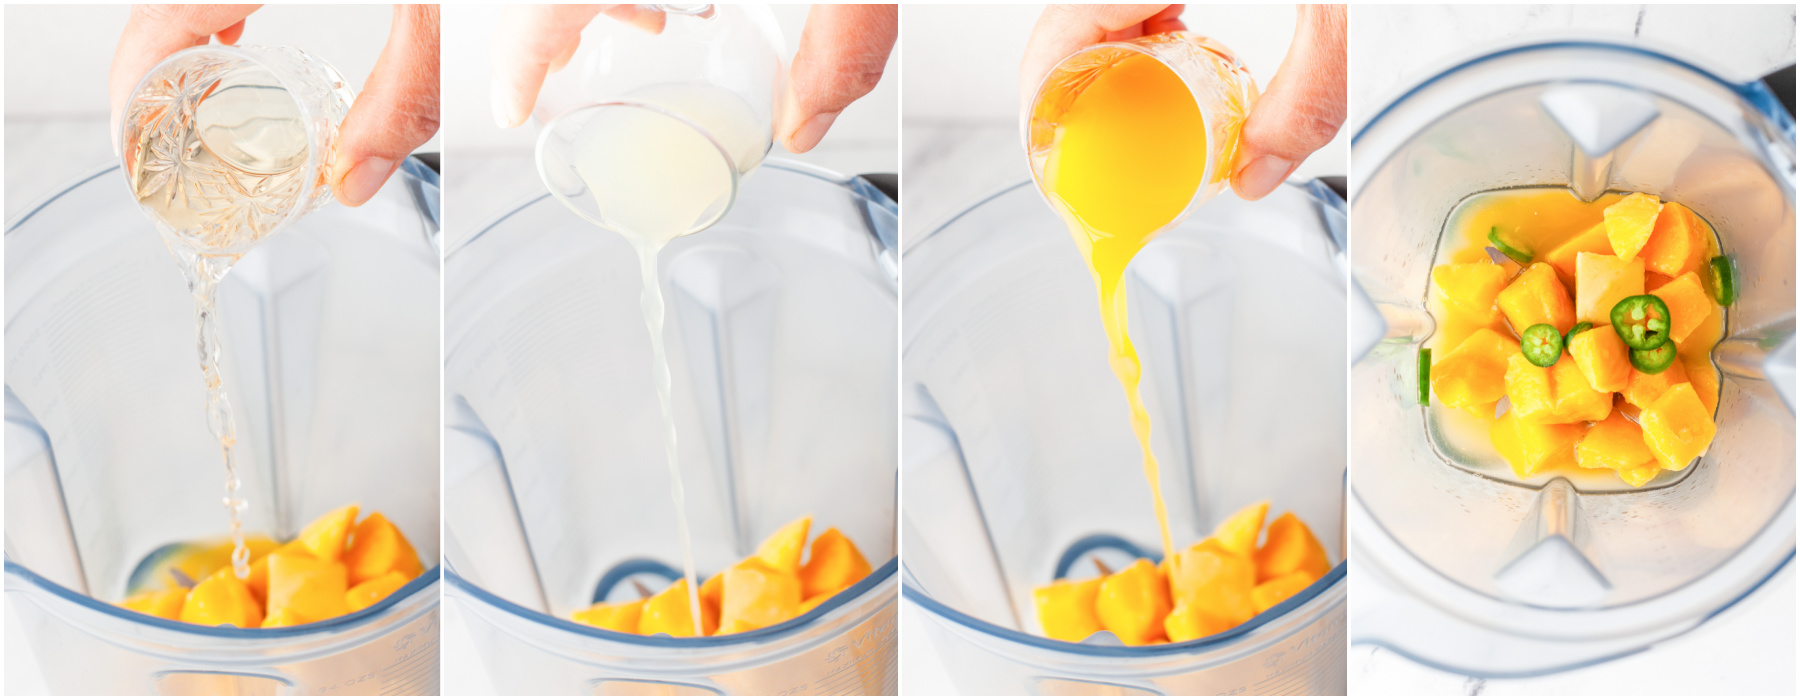 Process photos showing how to make a spicy mango margarita.